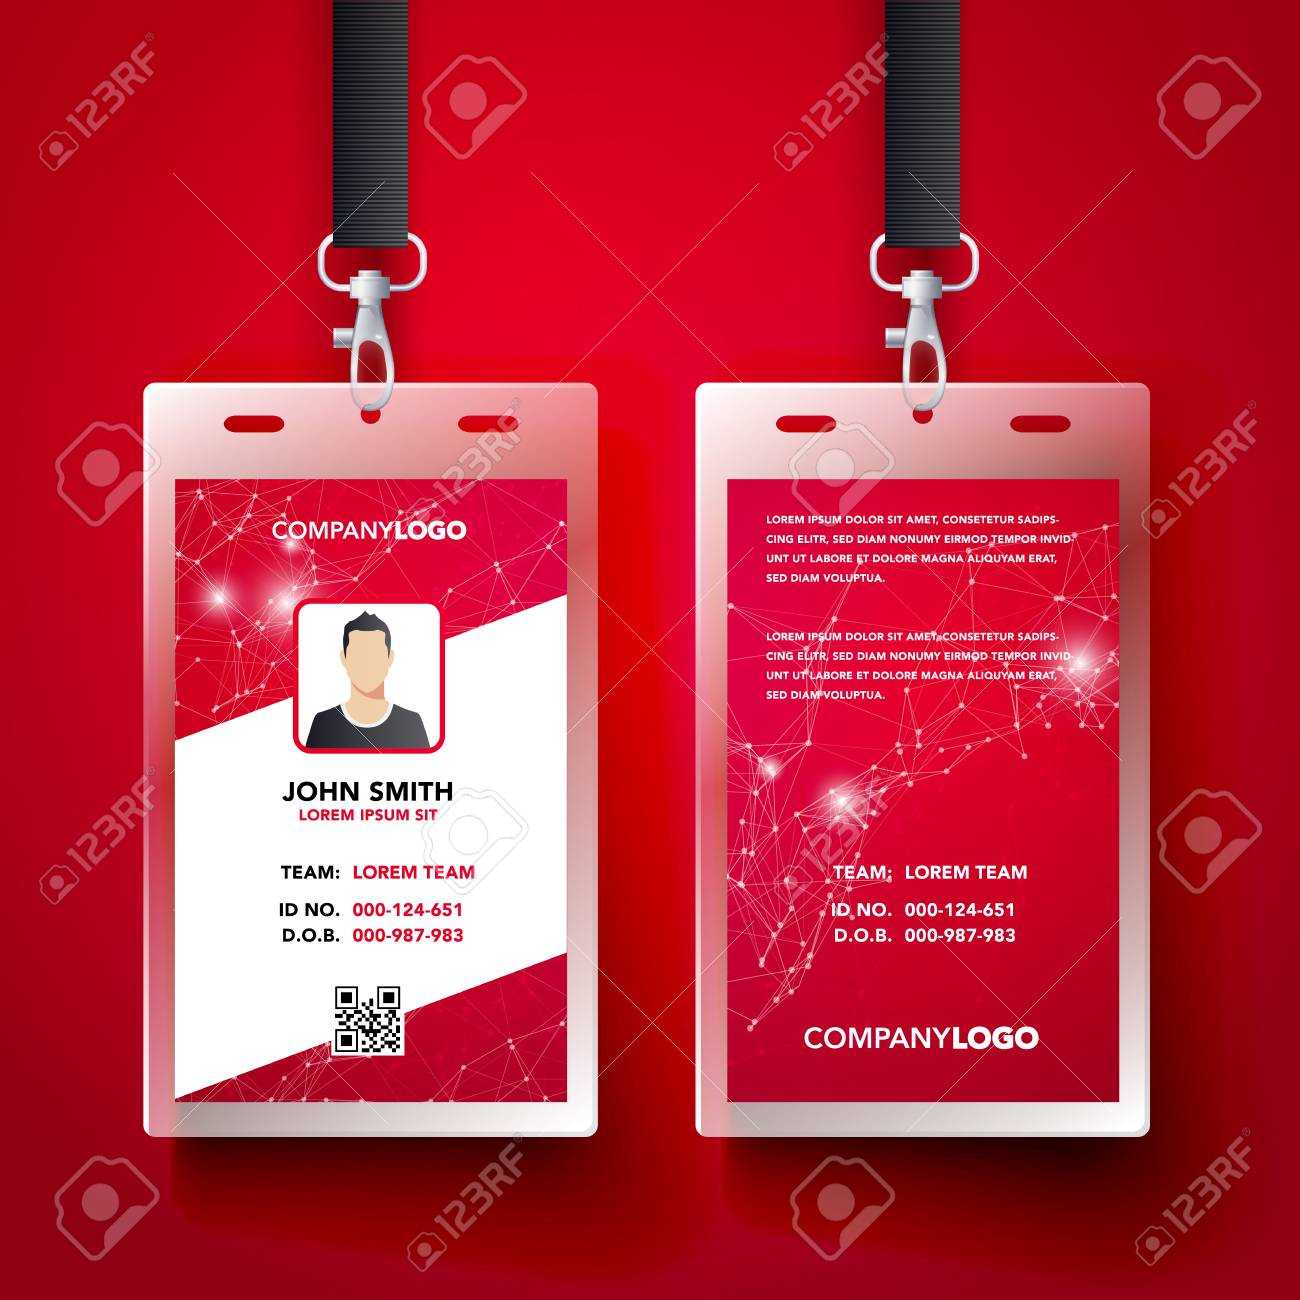 Vector Illustration Red Corporate Id Card Design Template Set Intended For Company Id Card Design Template